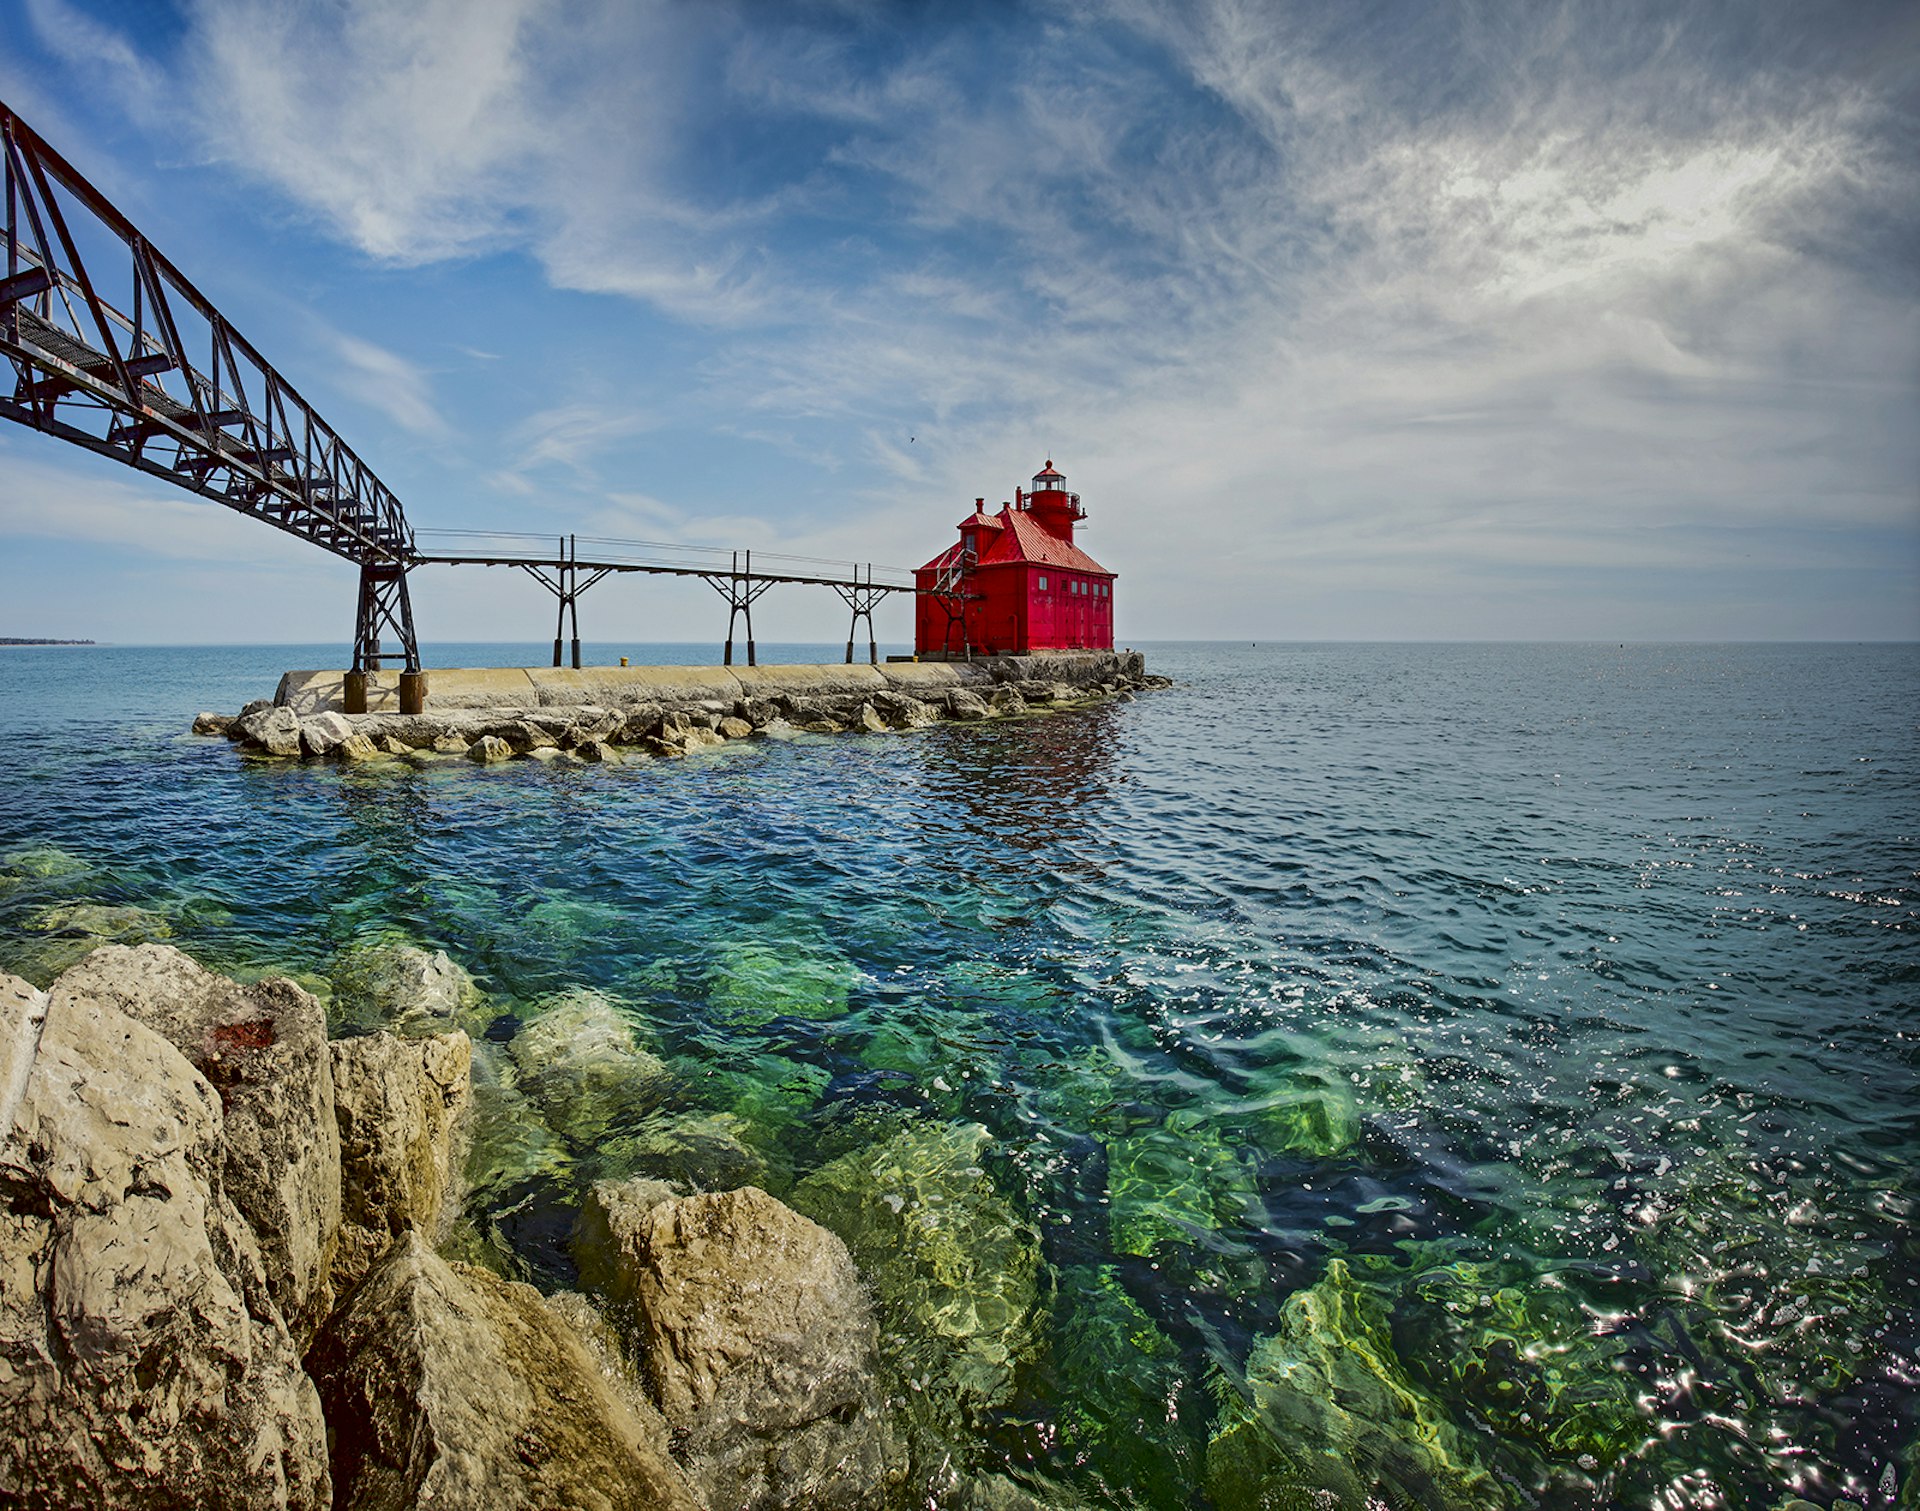 small red lighthouse sits in clear blue waters of lake michigan